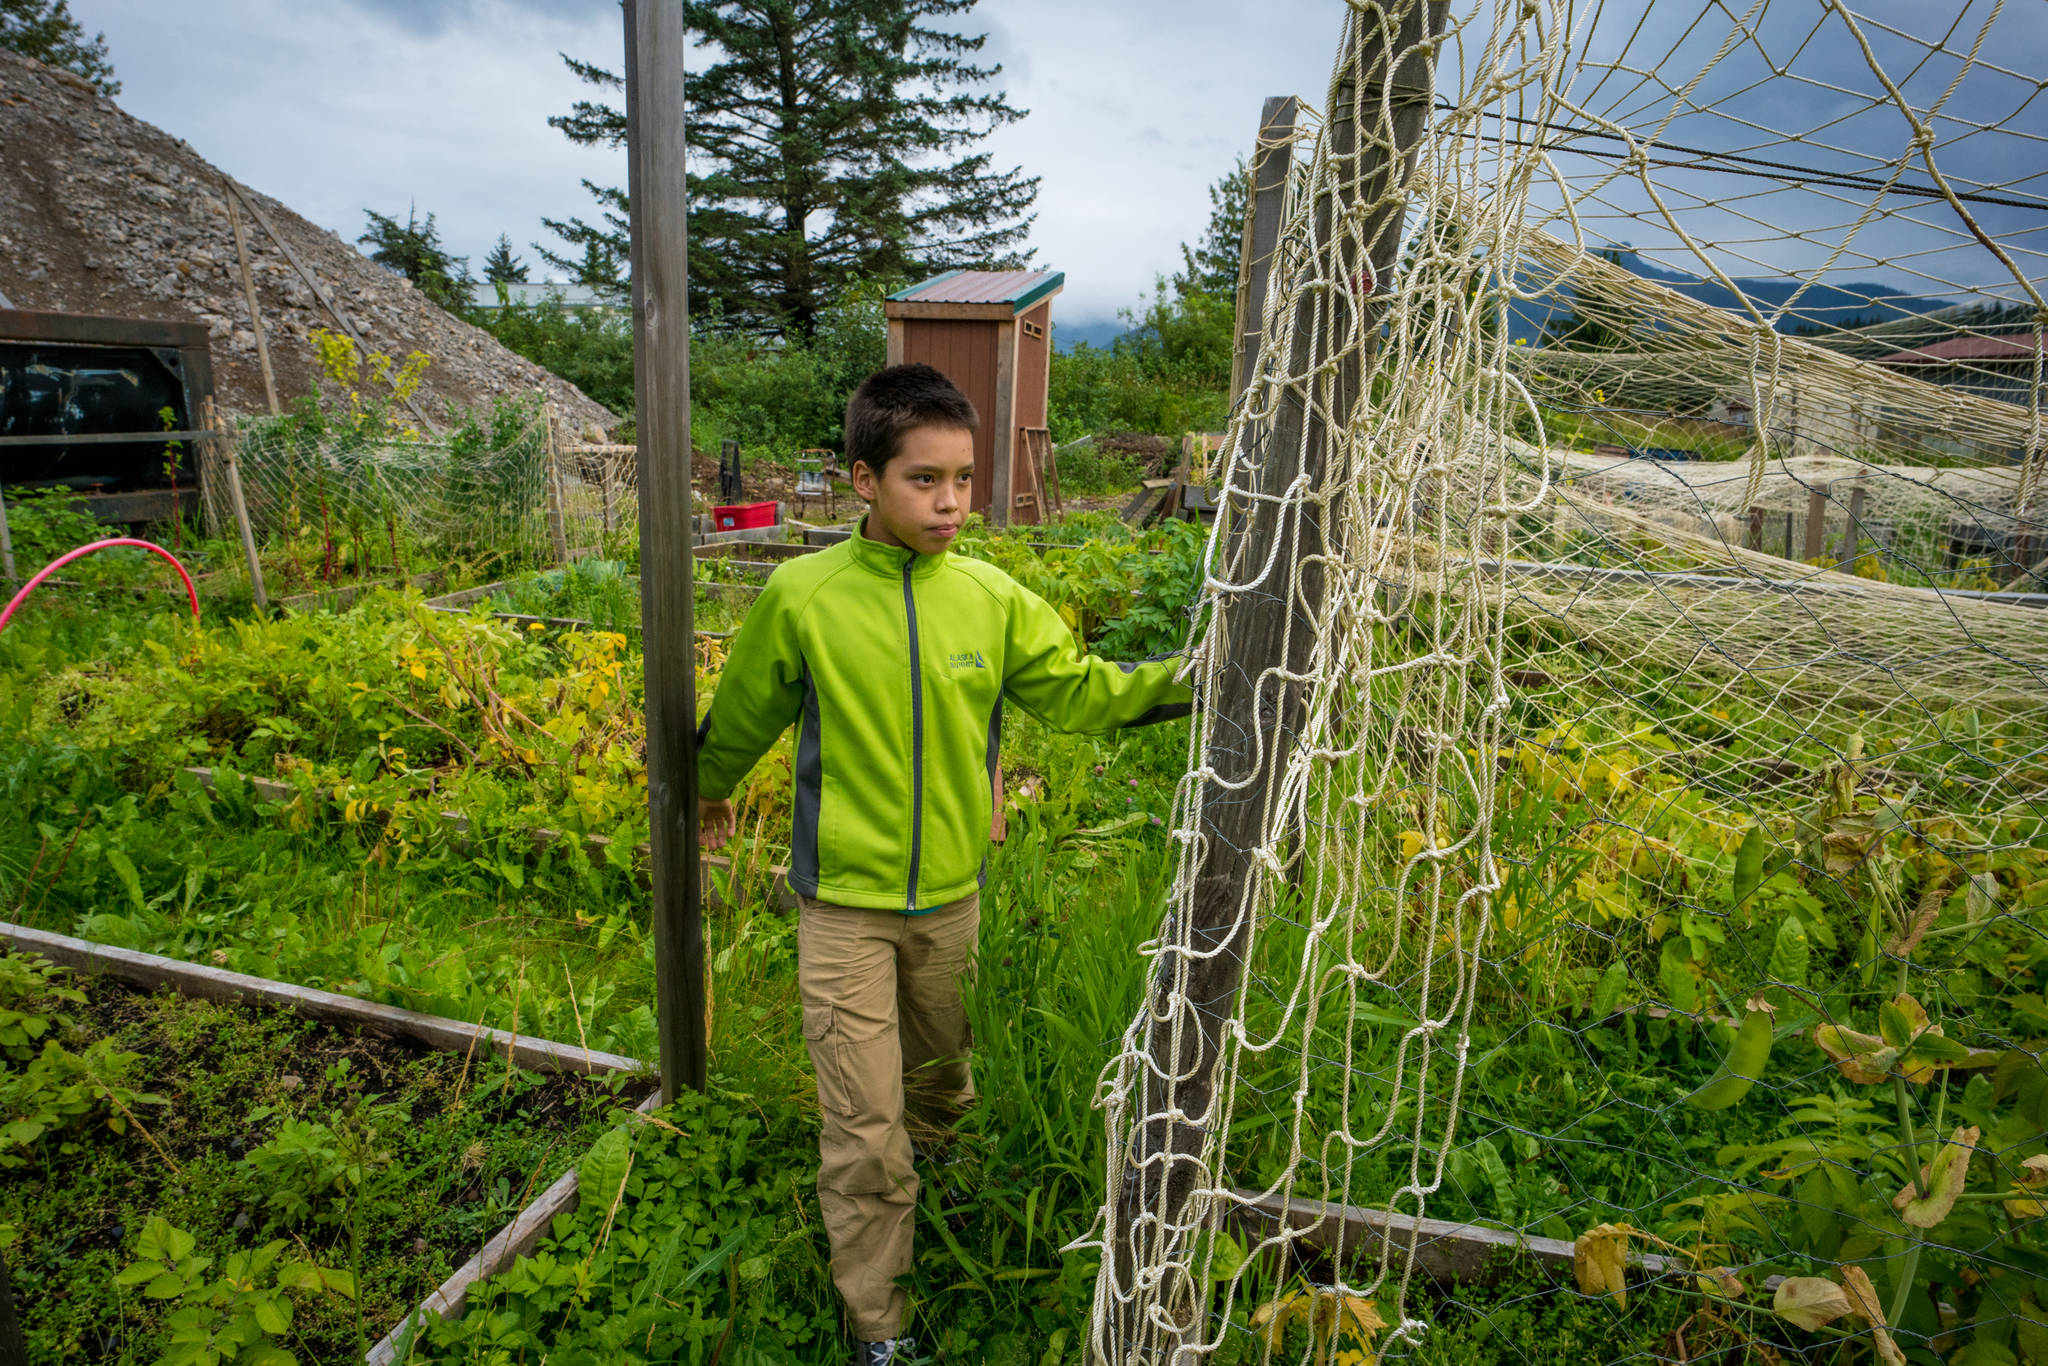 Ted walks in the Hoonah Healing Community Garden. (Photo by Bethany Goodrich)